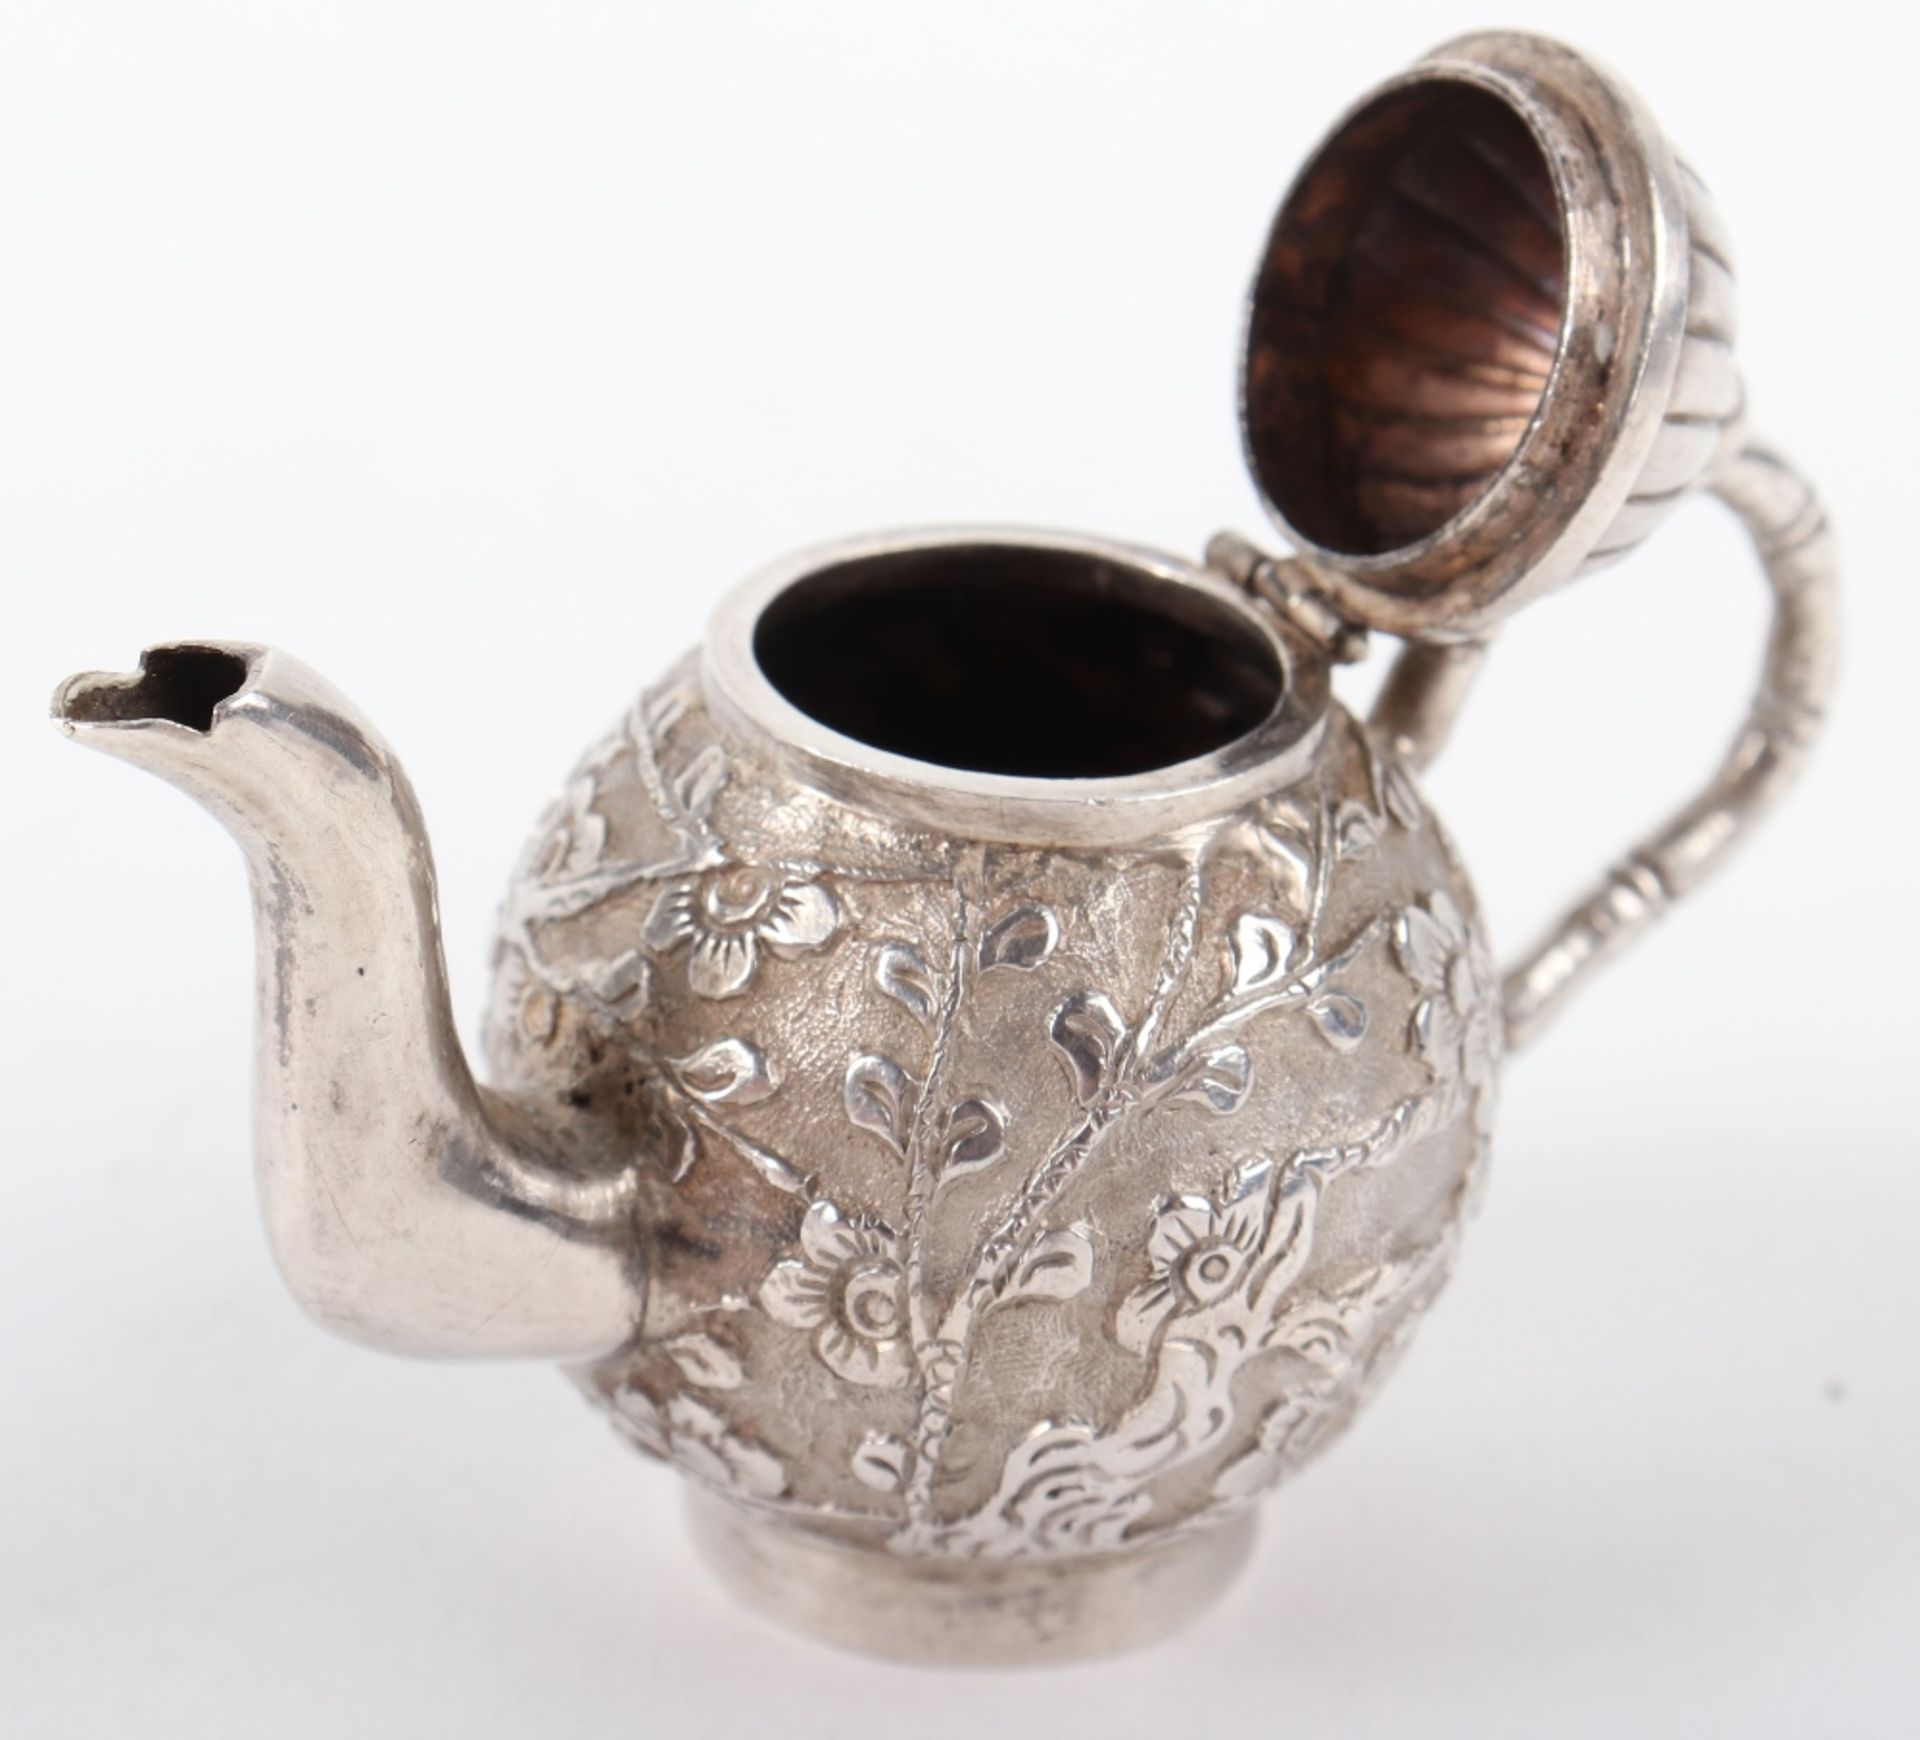 A miniature silver Chinese teapot - Image 3 of 3